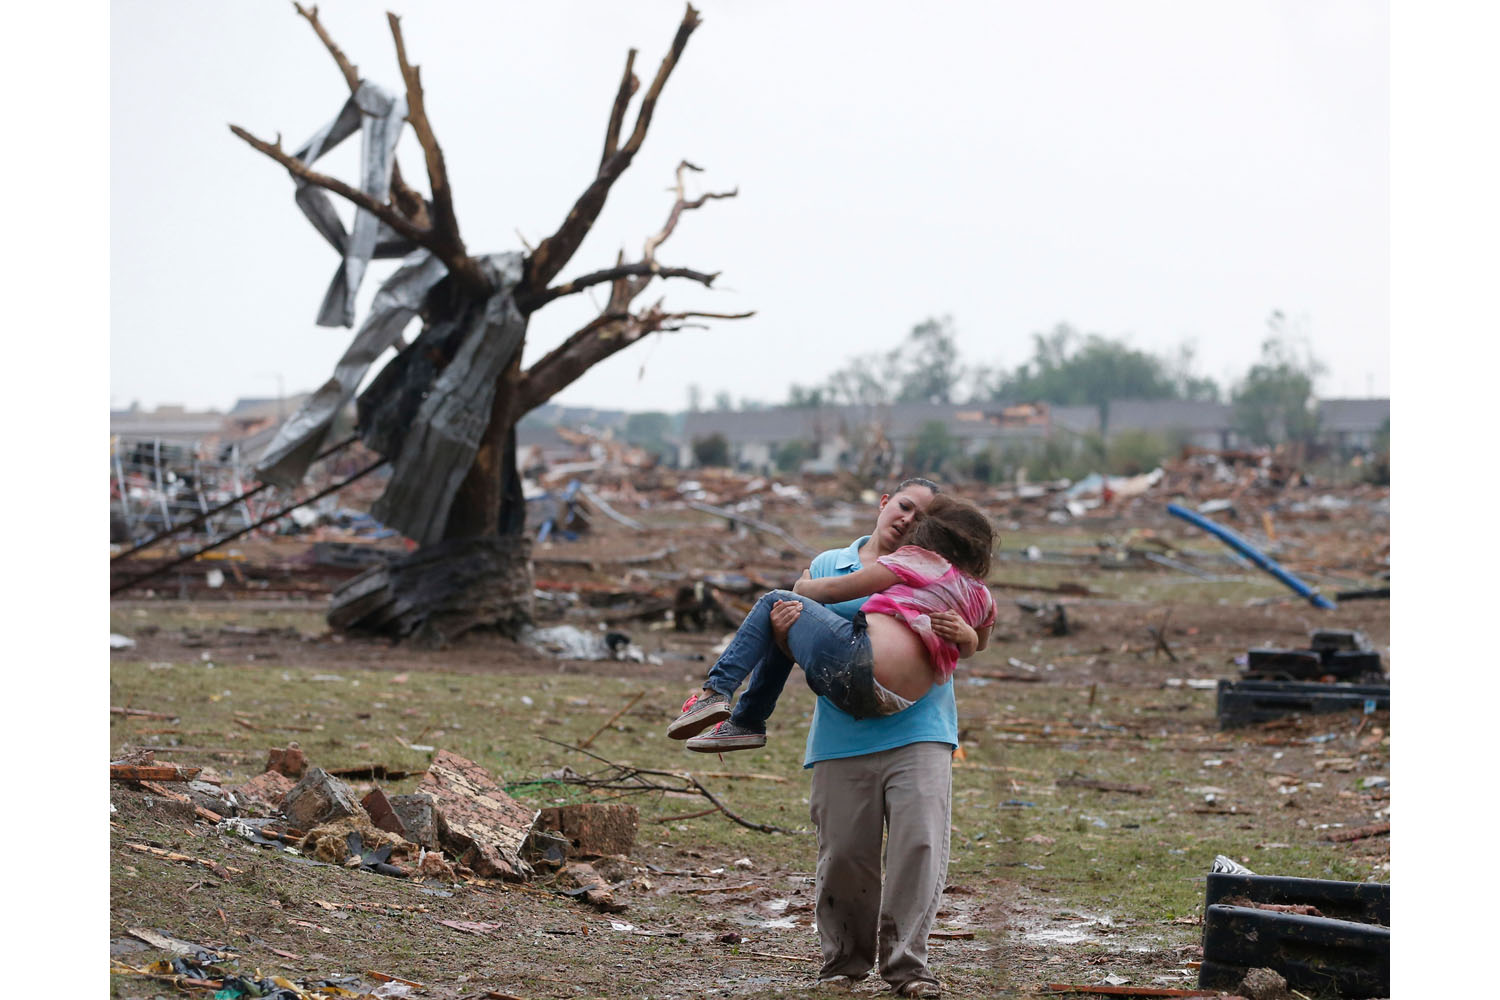 May 20, 2013. A woman carries a child through a field near the collapsed Plaza Towers Elementary School in Moore, Oklahoma. A tornado as much as a mile wide with winds up to 200 mph roared through the Oklahoma City suburbs Monday, flattening entire neighborhoods, setting buildings on fire and landing a direct blow on an elementary school.